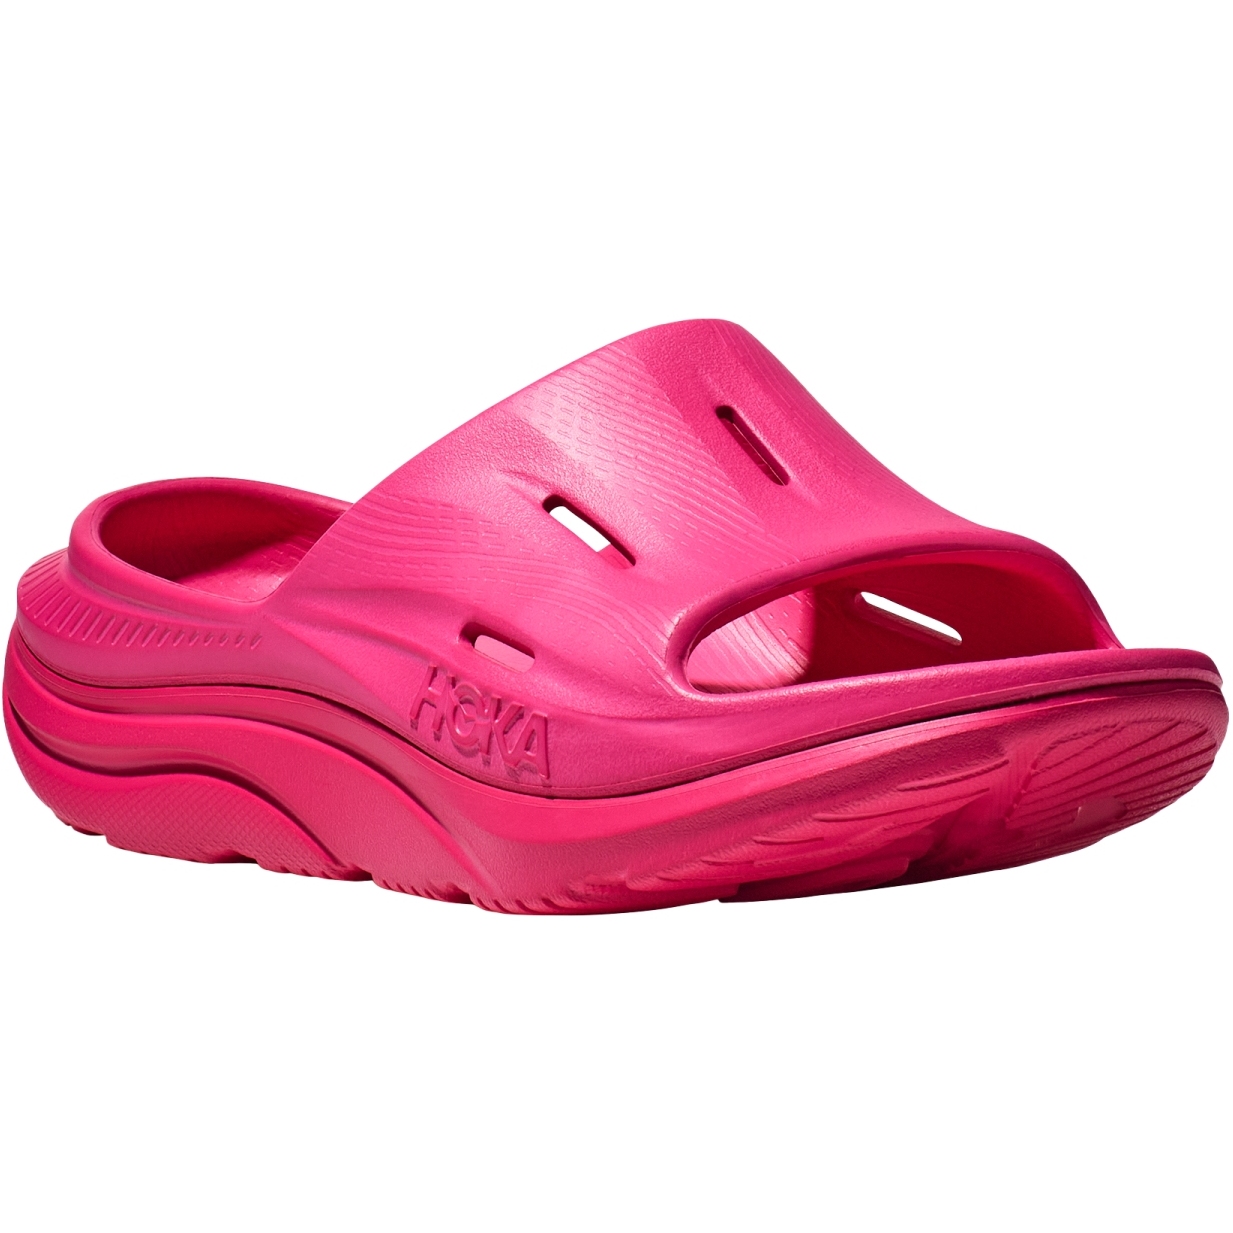 Picture of Hoka Ora Recovery Slide 3 Unixes Slippers - pink yarrow / pink yarrow